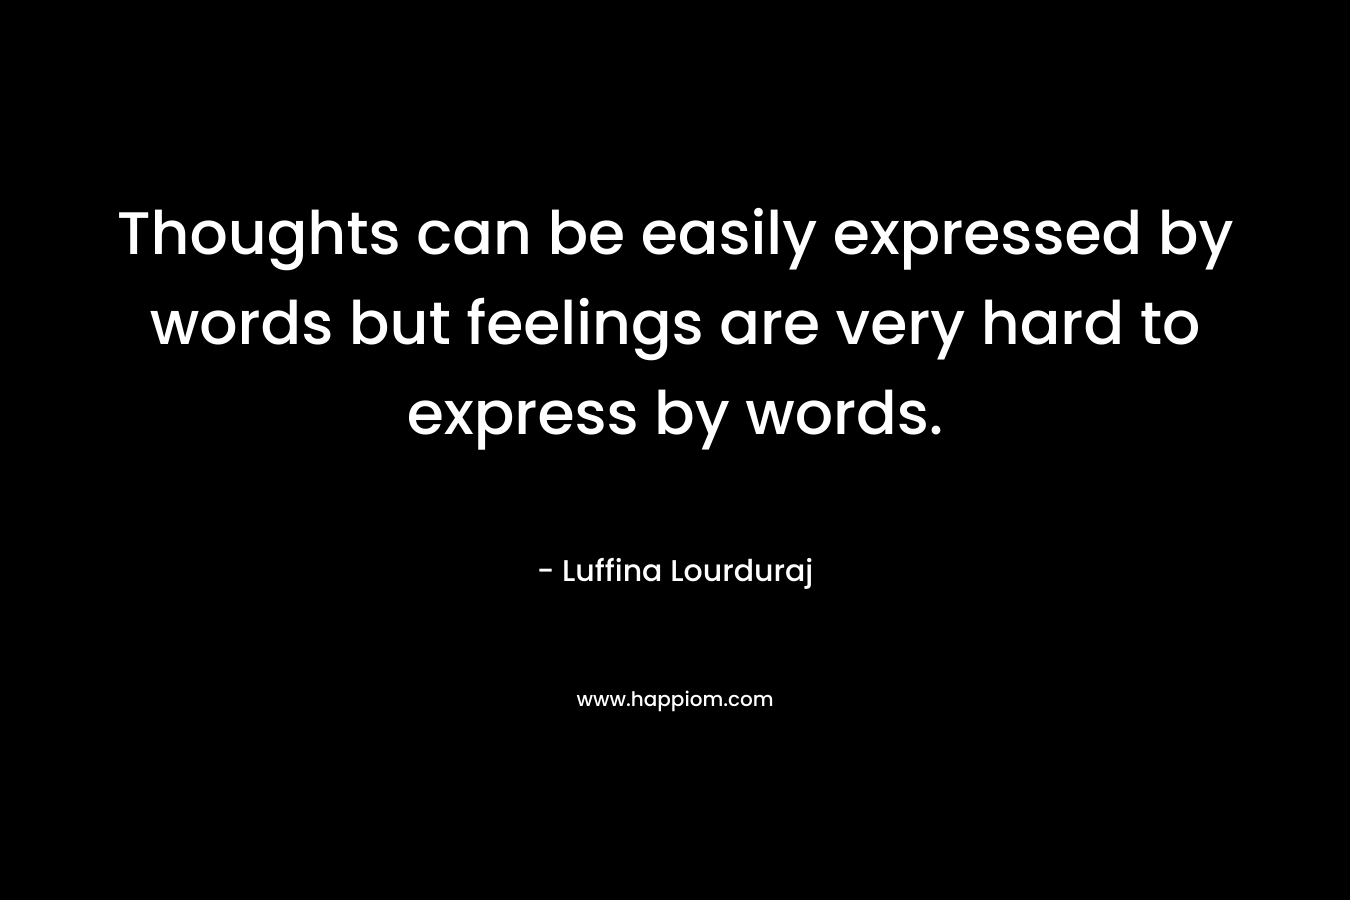 Thoughts can be easily expressed by words but feelings are very hard to express by words. – Luffina Lourduraj